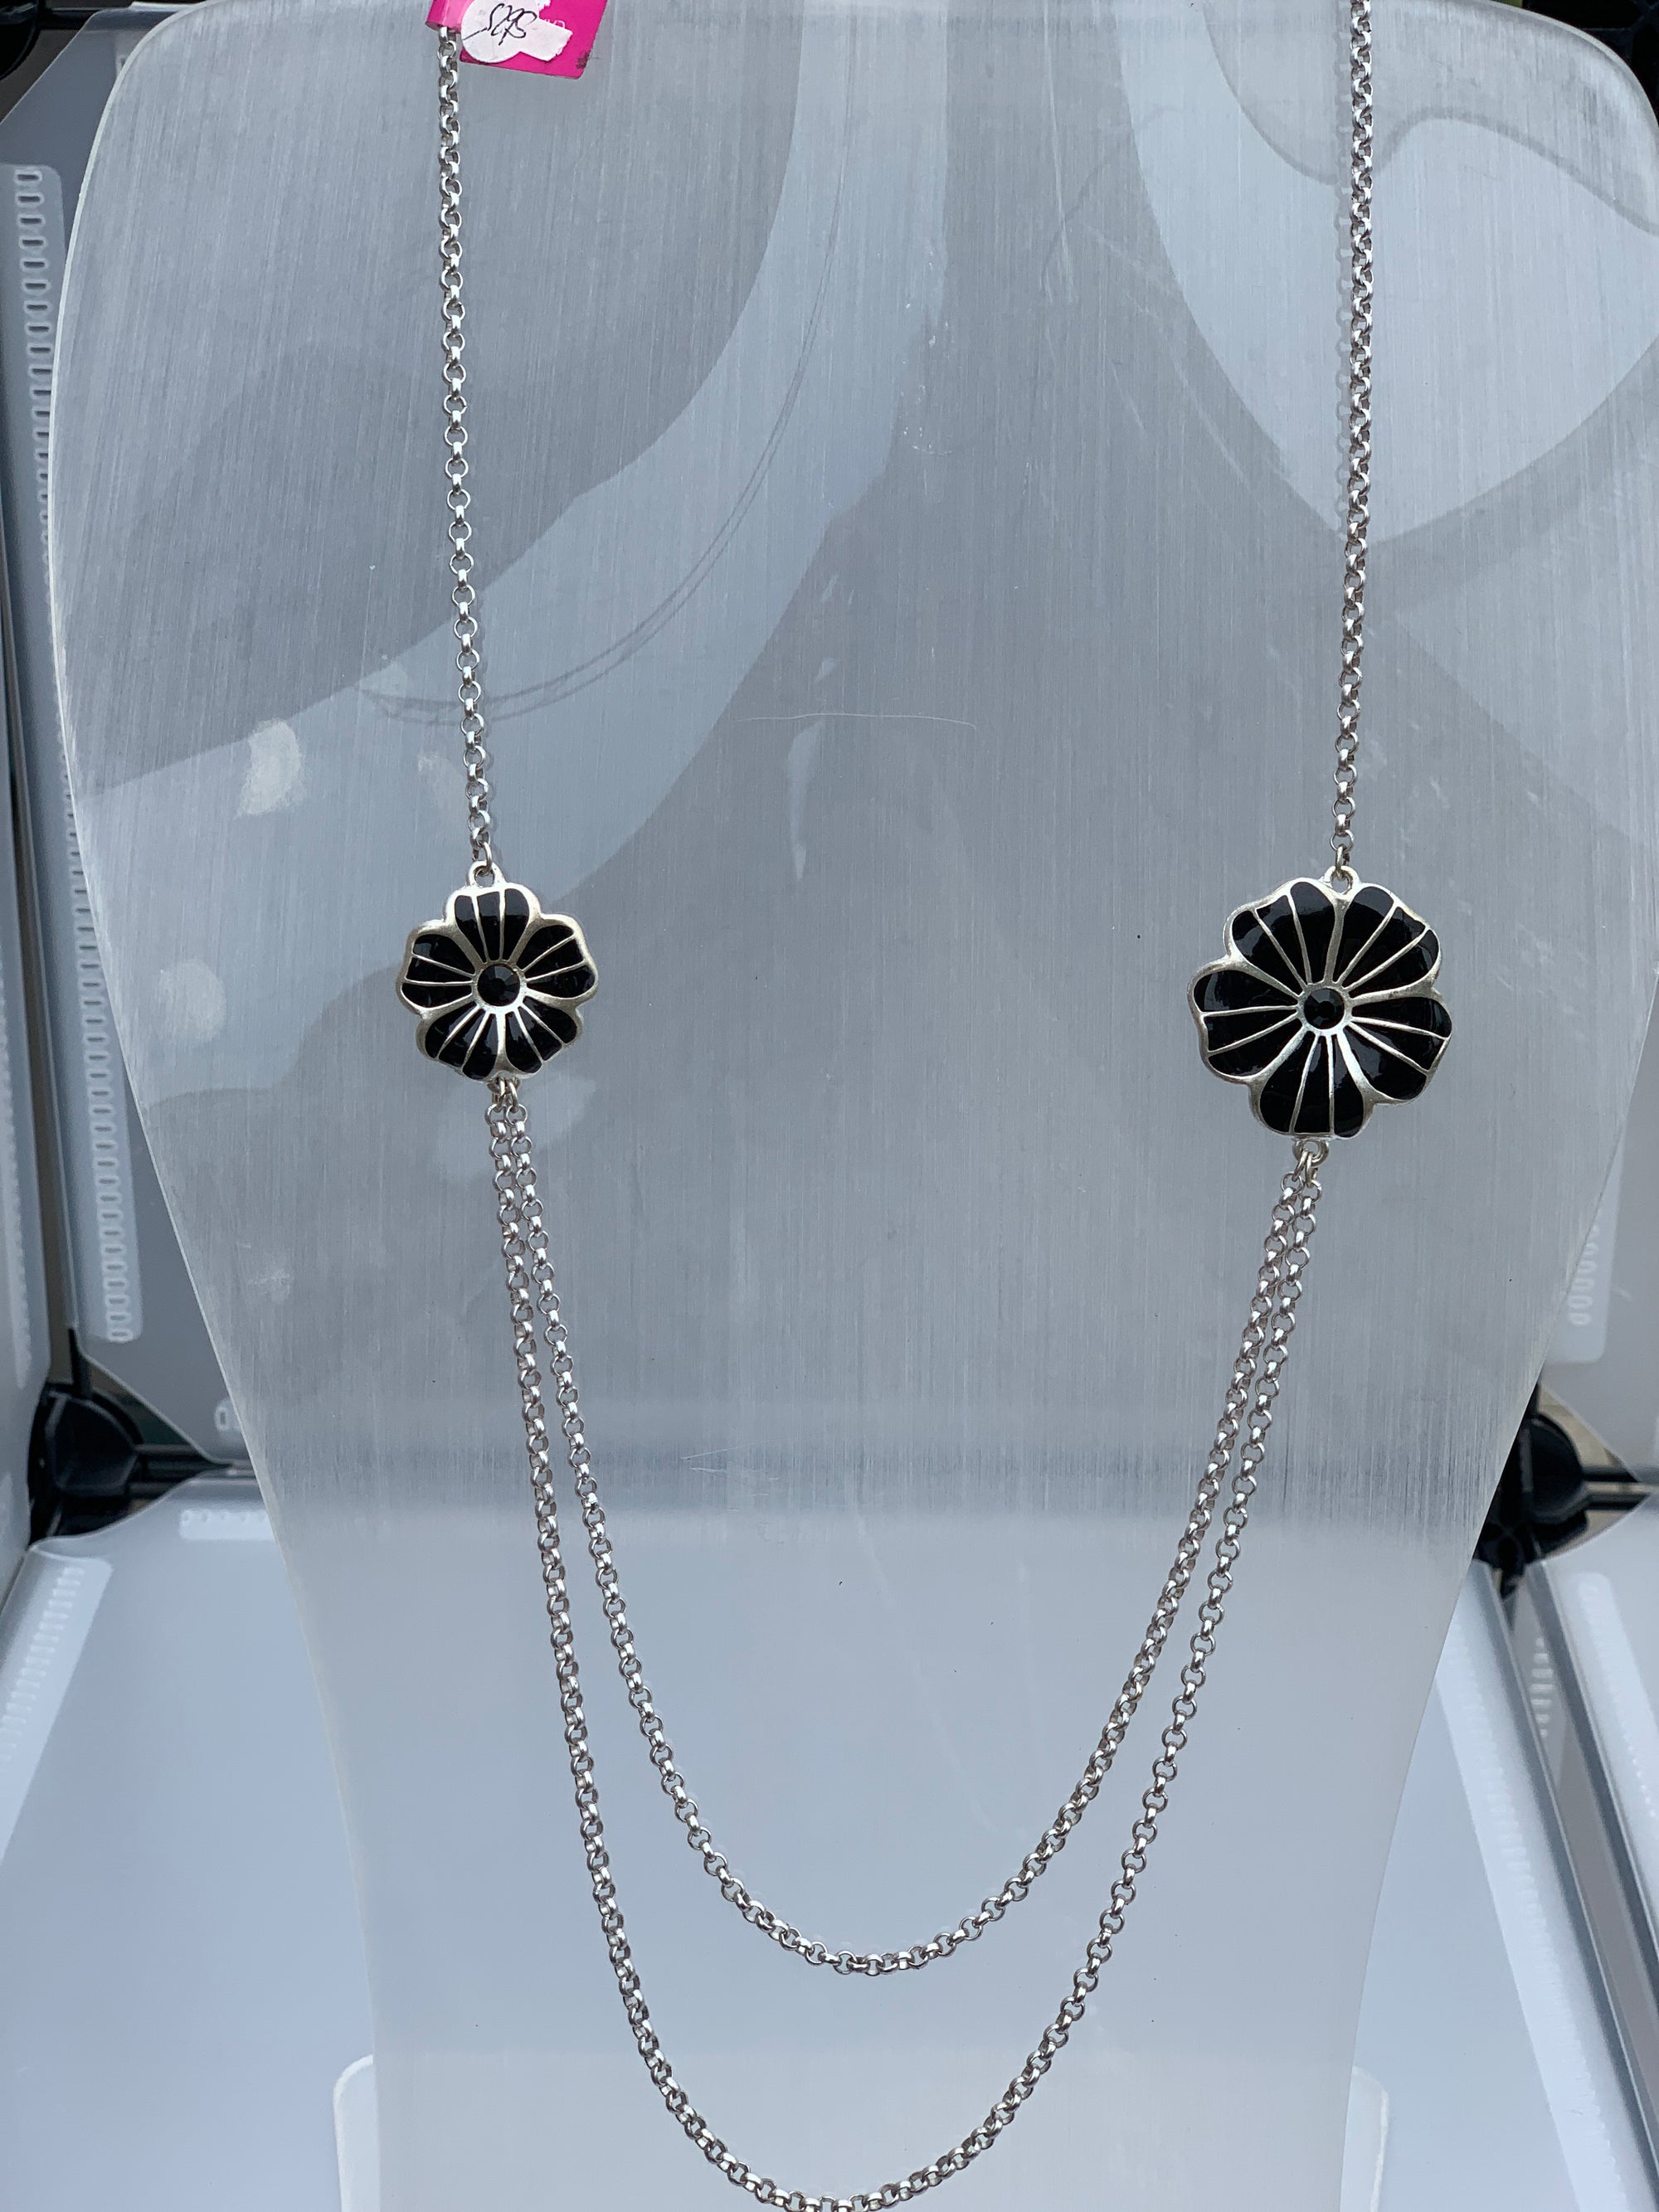 Black and Silver flowers with black stone on a chain